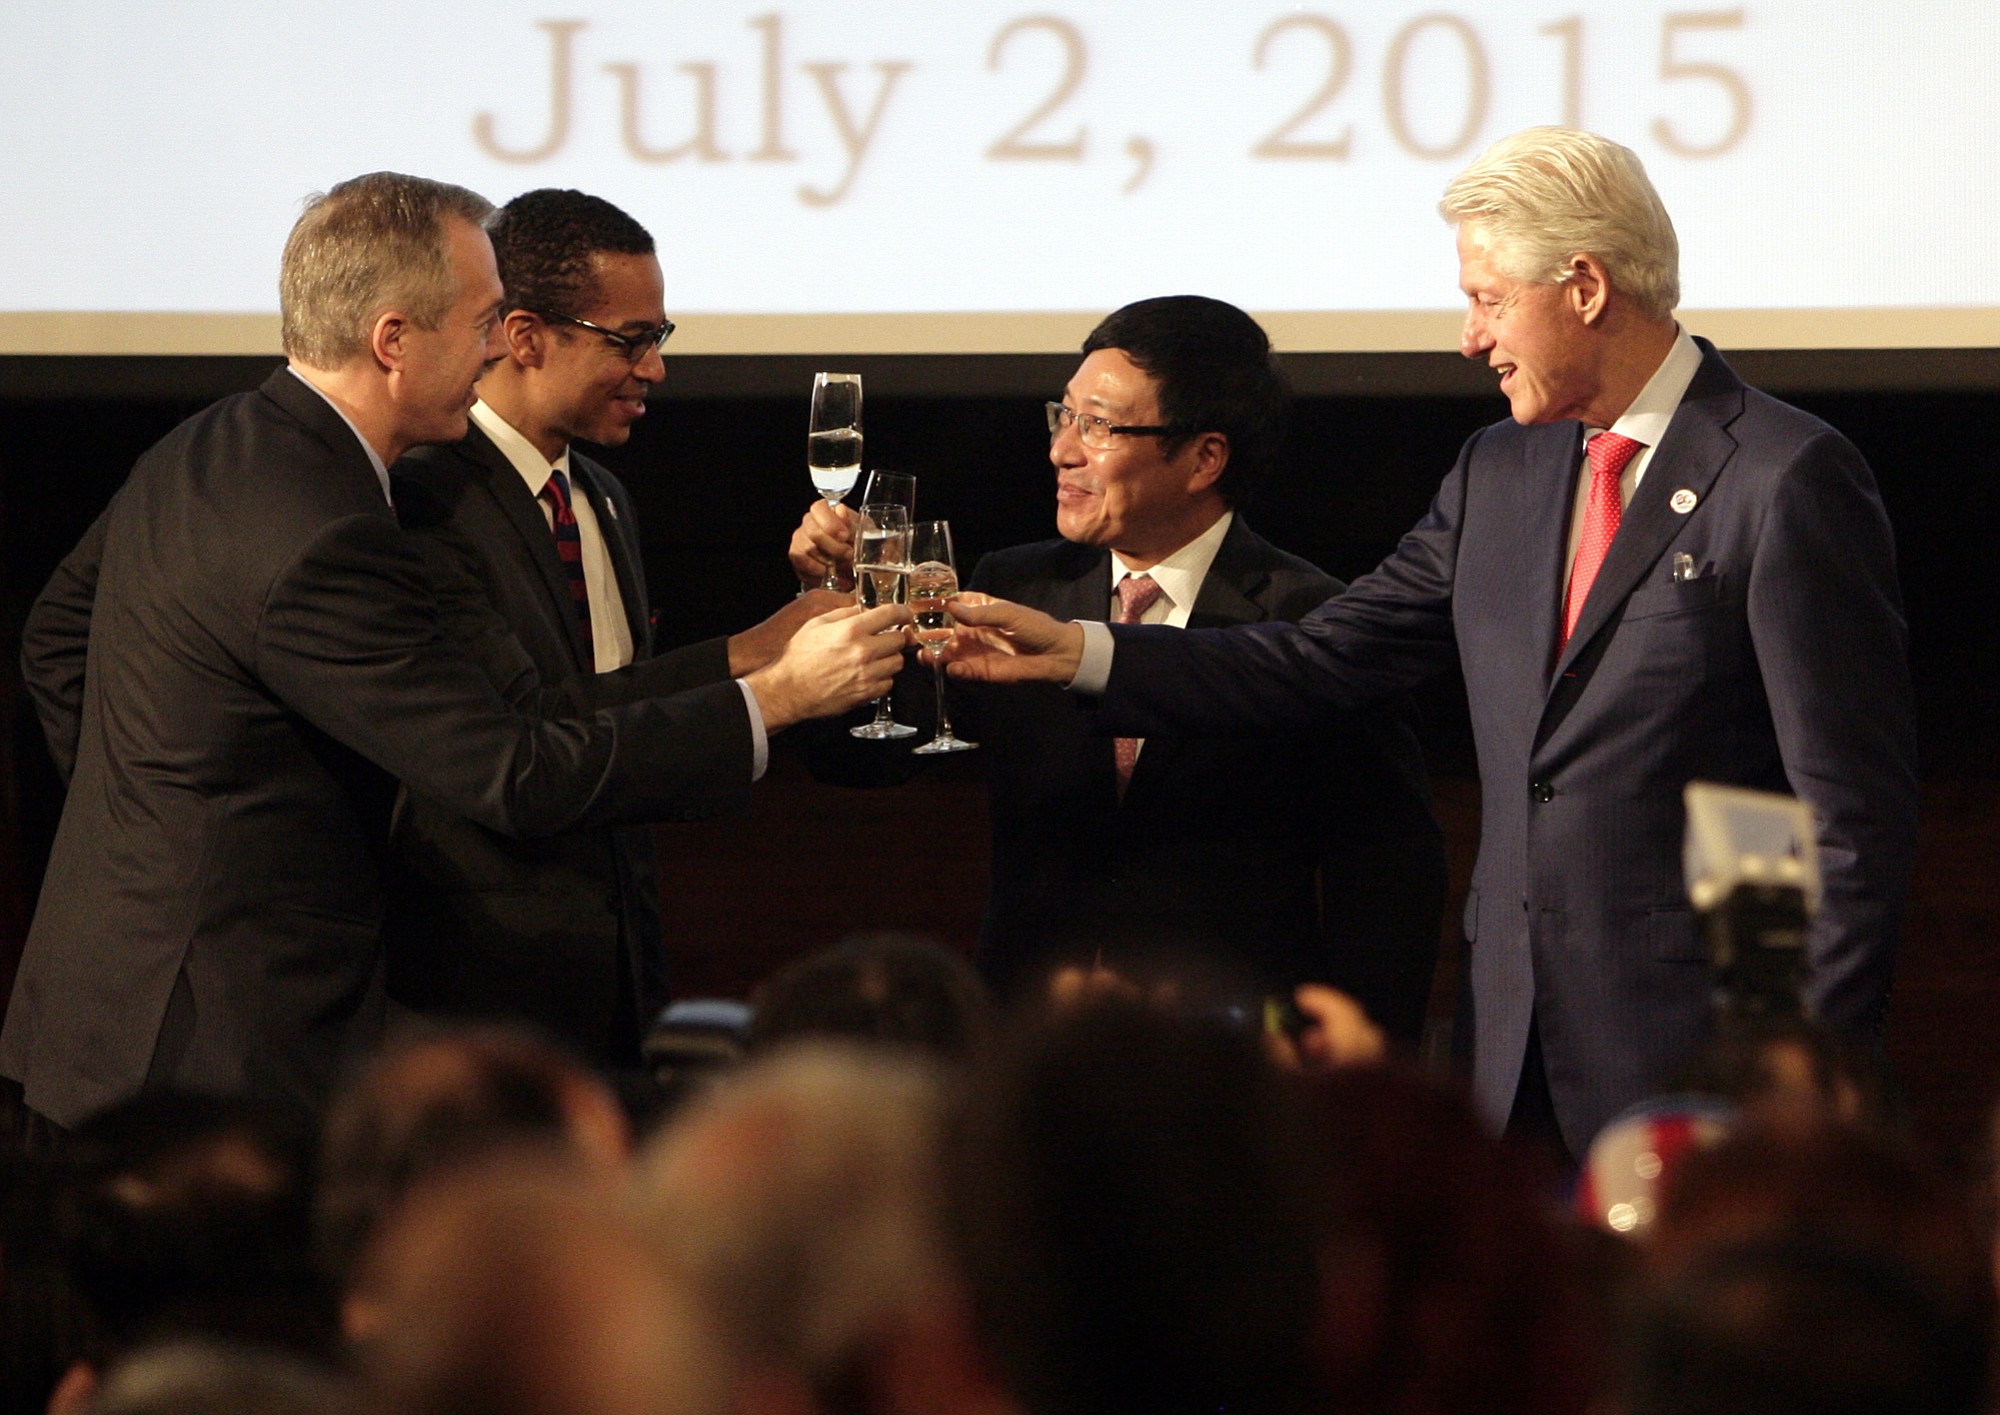 Former U.S. President Bill Clinton, right, Vietnamese Deputy Prime Minister and Foreign Minister Pham Binh MInh, second from right, Clayton Bond, spouse of U.S. Ambassador Ted Osius, third from right and U.S. Ambassador Ted Osius, far left, toast at an event celebrating 239th anniversary of the U.S. independence and 20th anniversary of normalization of relations between the U.S.